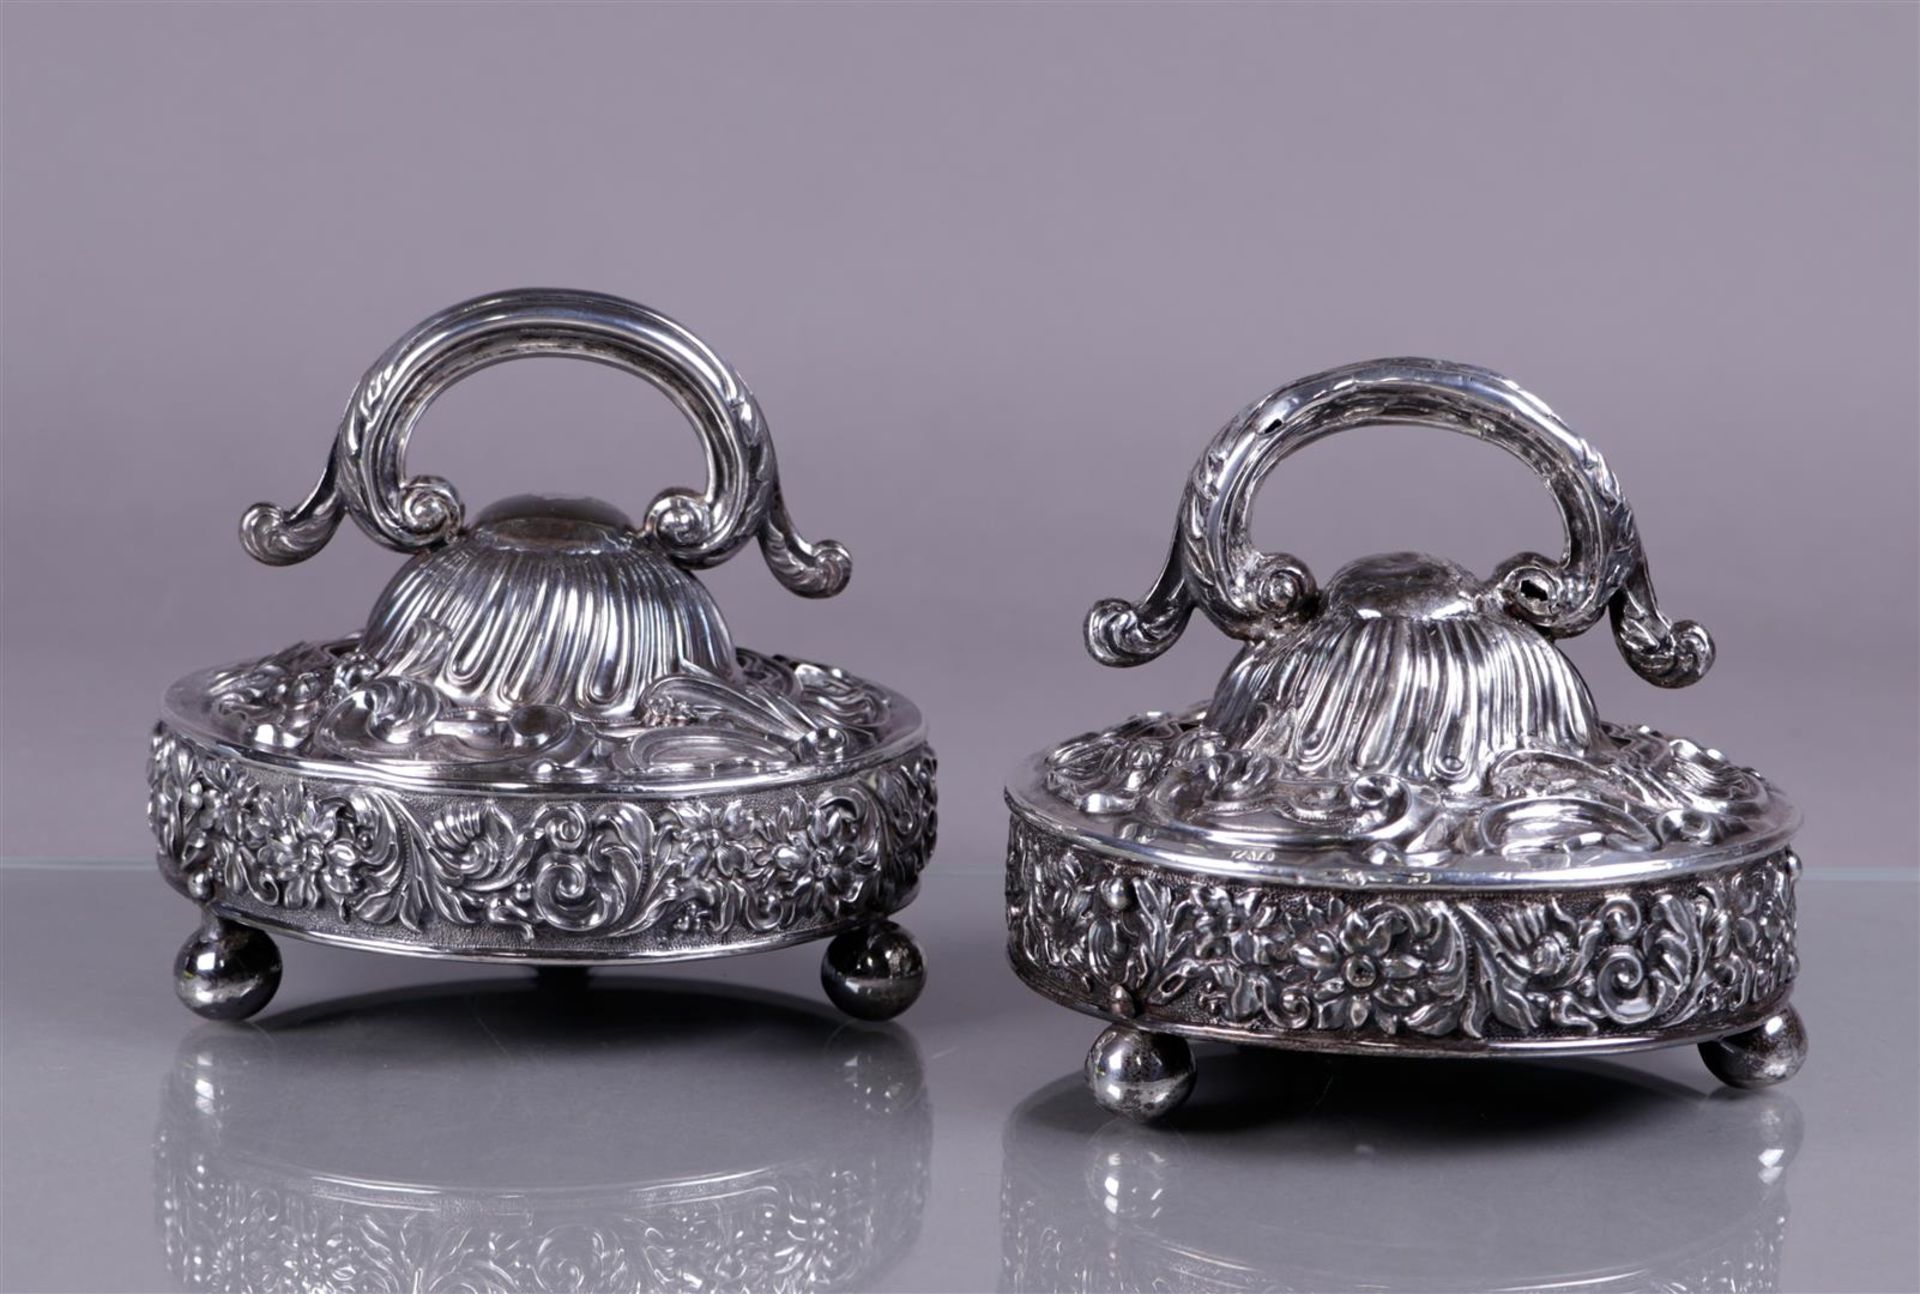 Two silver consecration bells, 'Gift from Maria de Bie WED Joannes vermunt'. Late 19th century. 766 